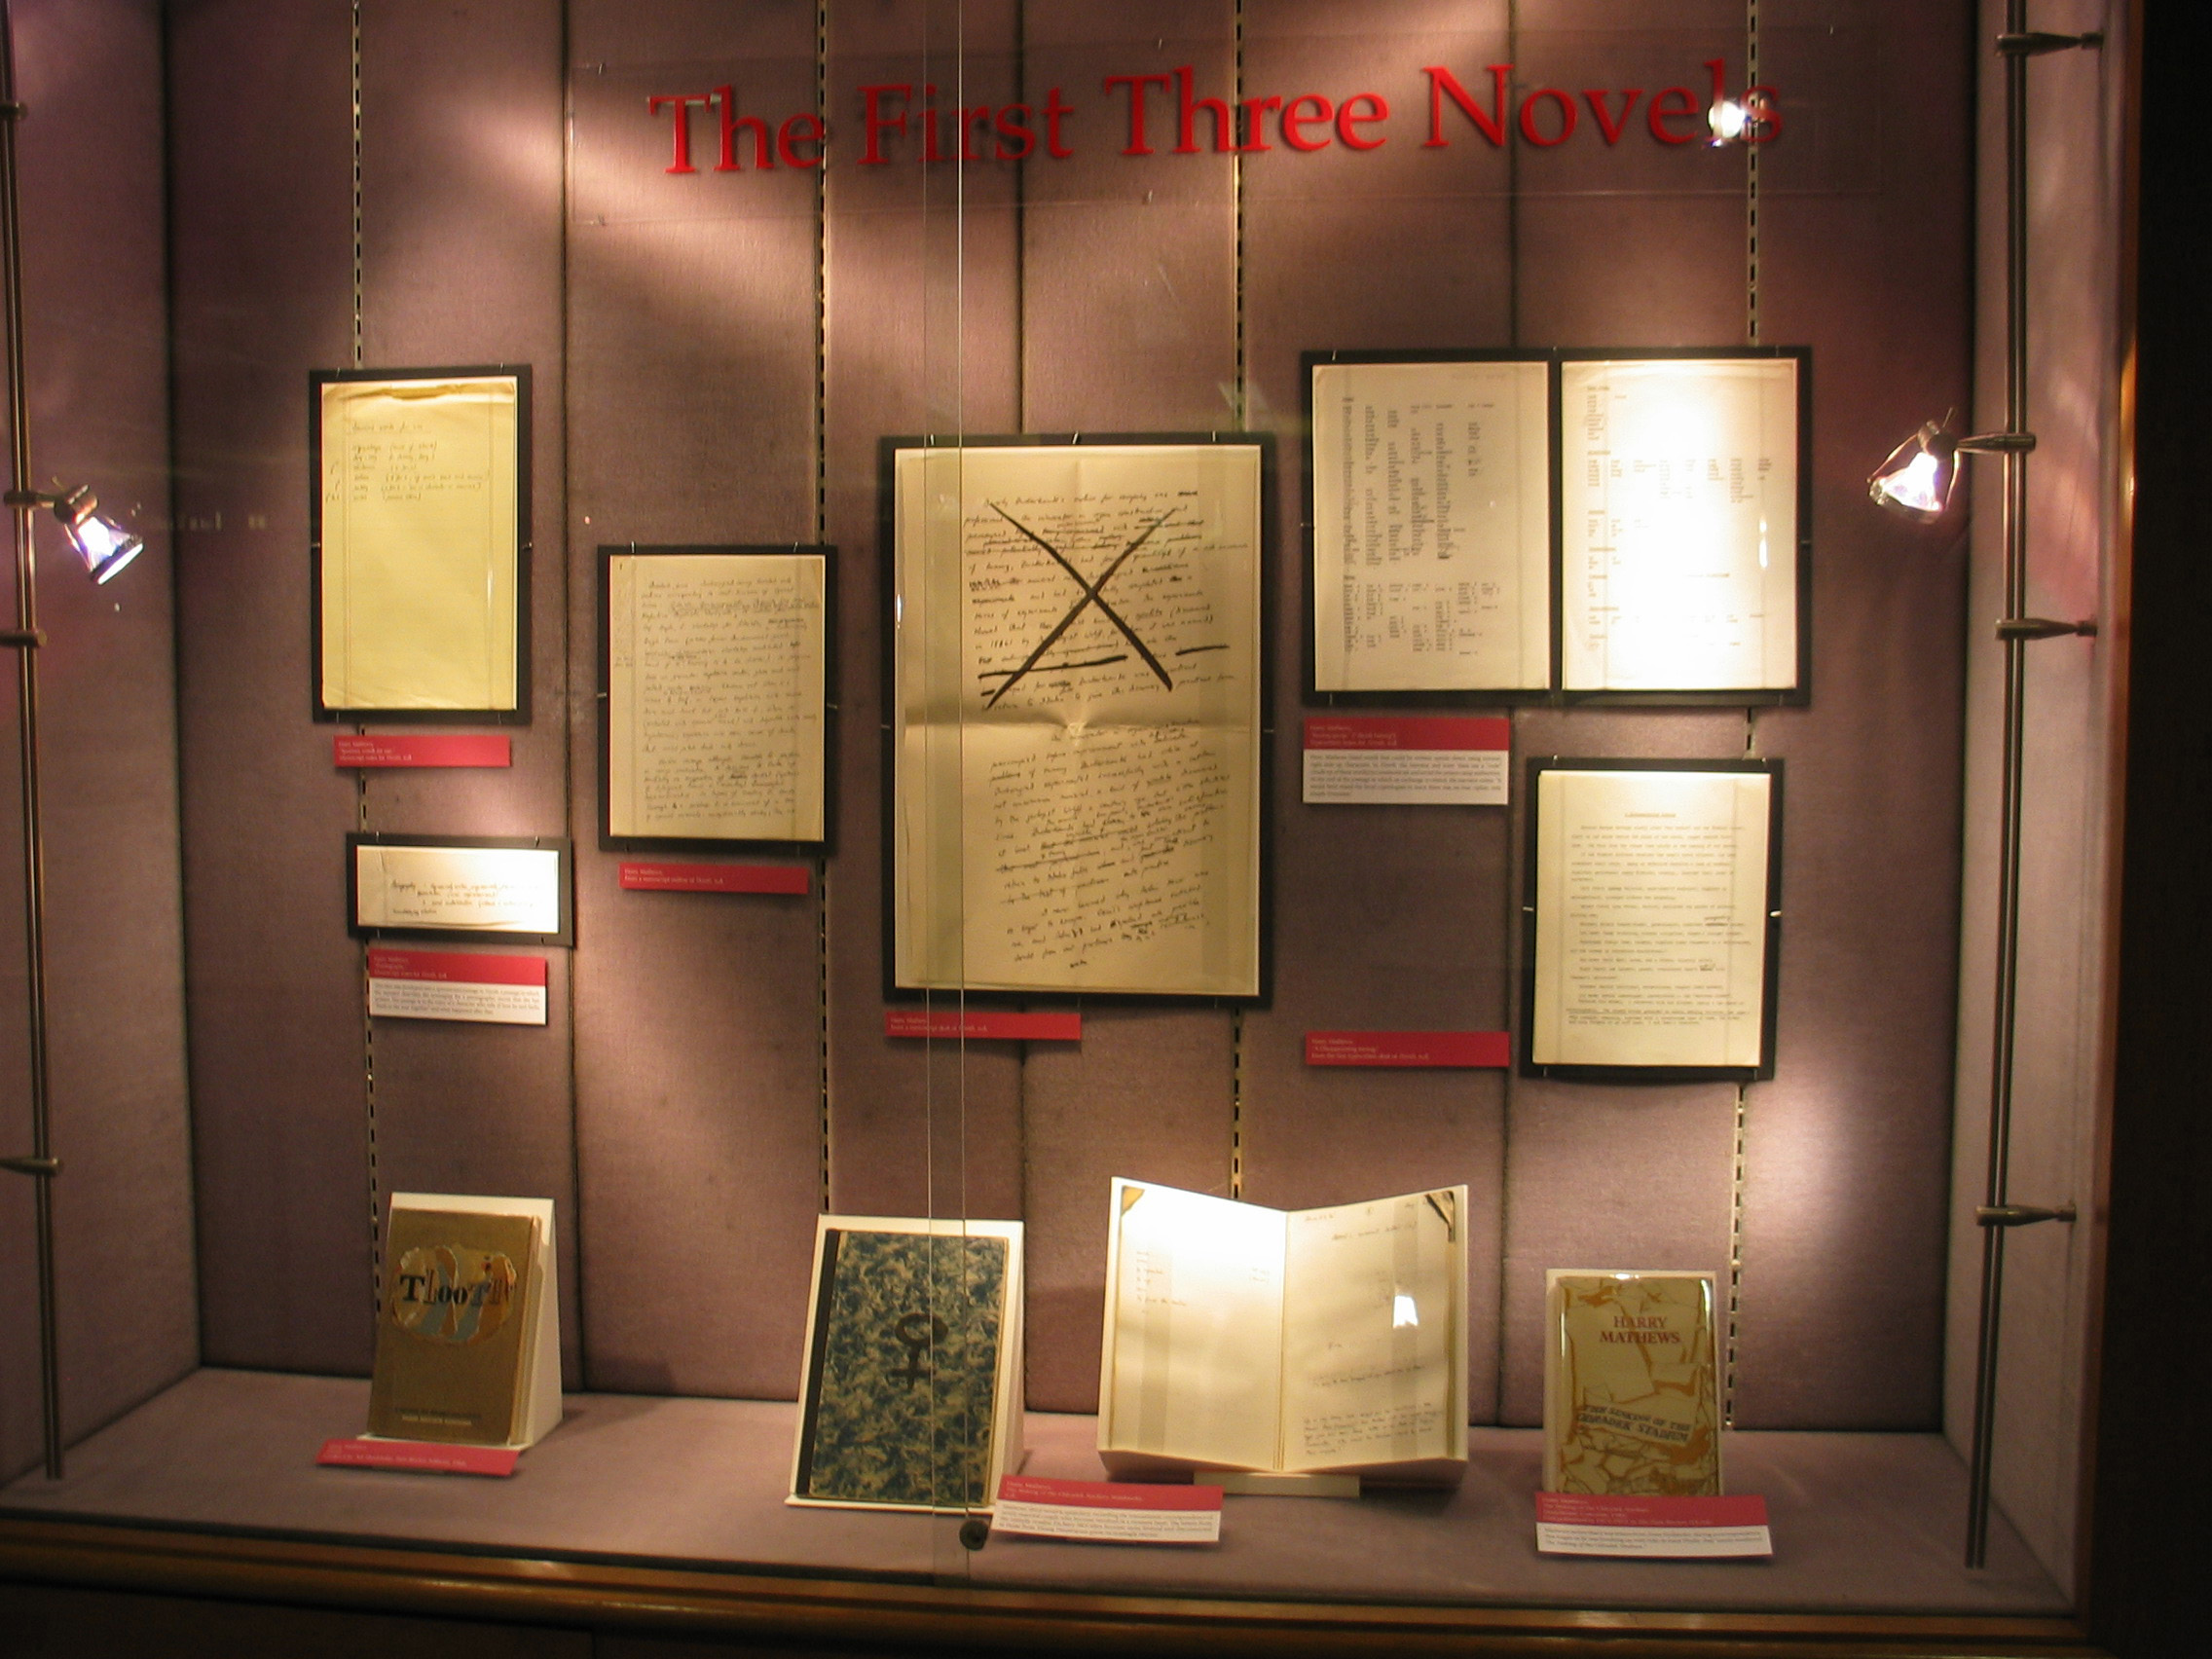 Case 6 - The First Three Novels